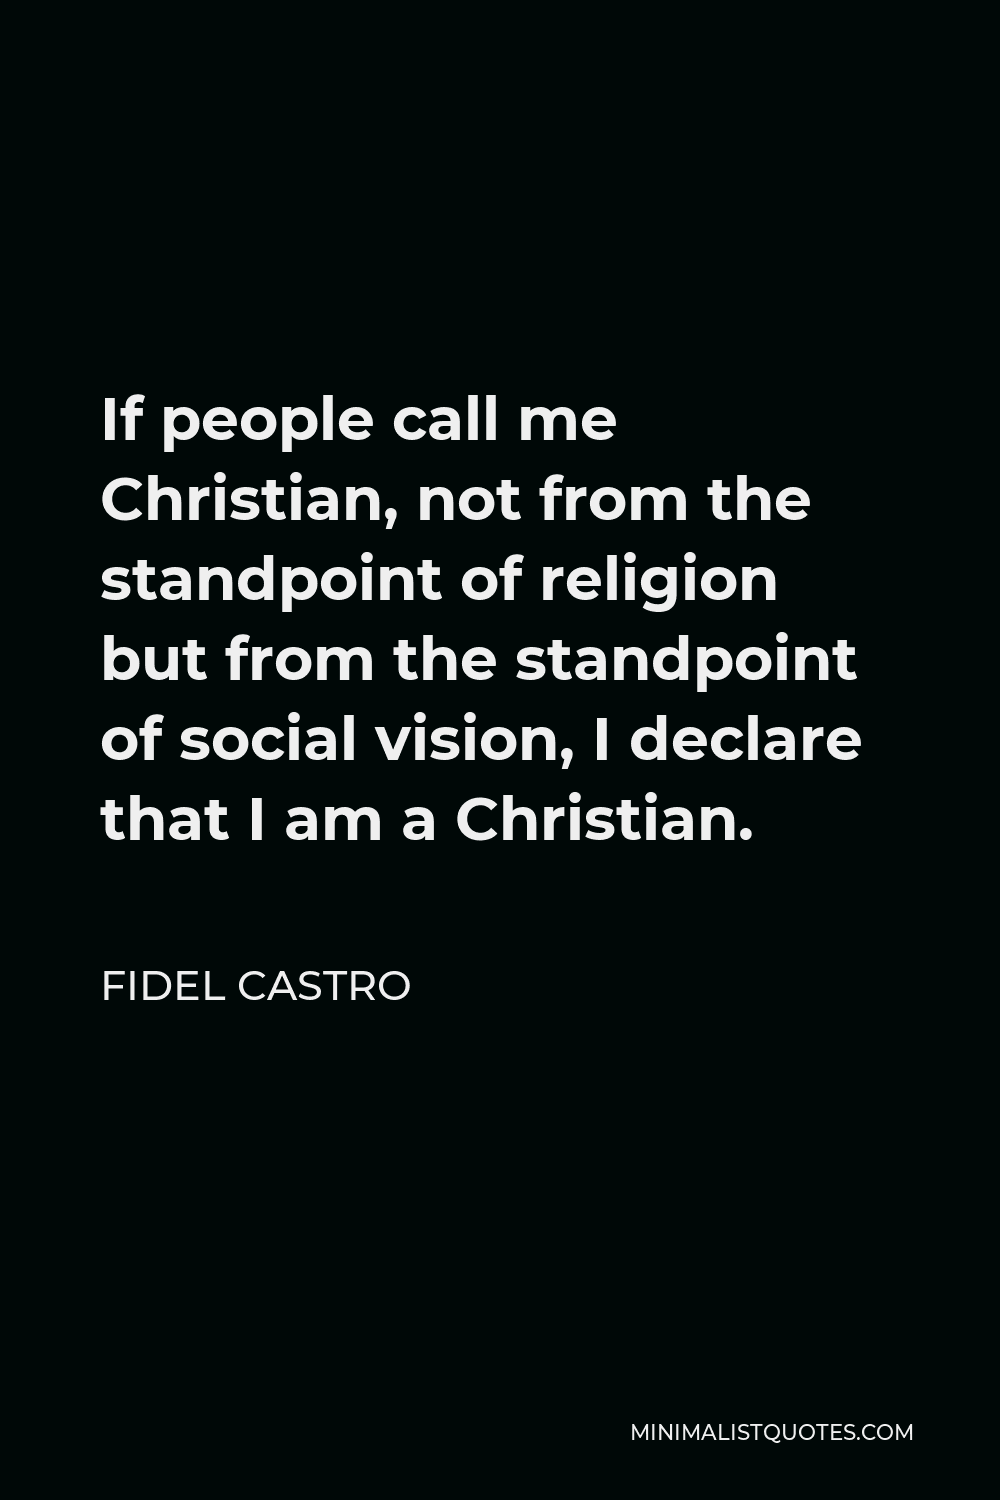 Fidel Castro Quote - If people call me Christian, not from the standpoint of religion but from the standpoint of social vision, I declare that I am a Christian.